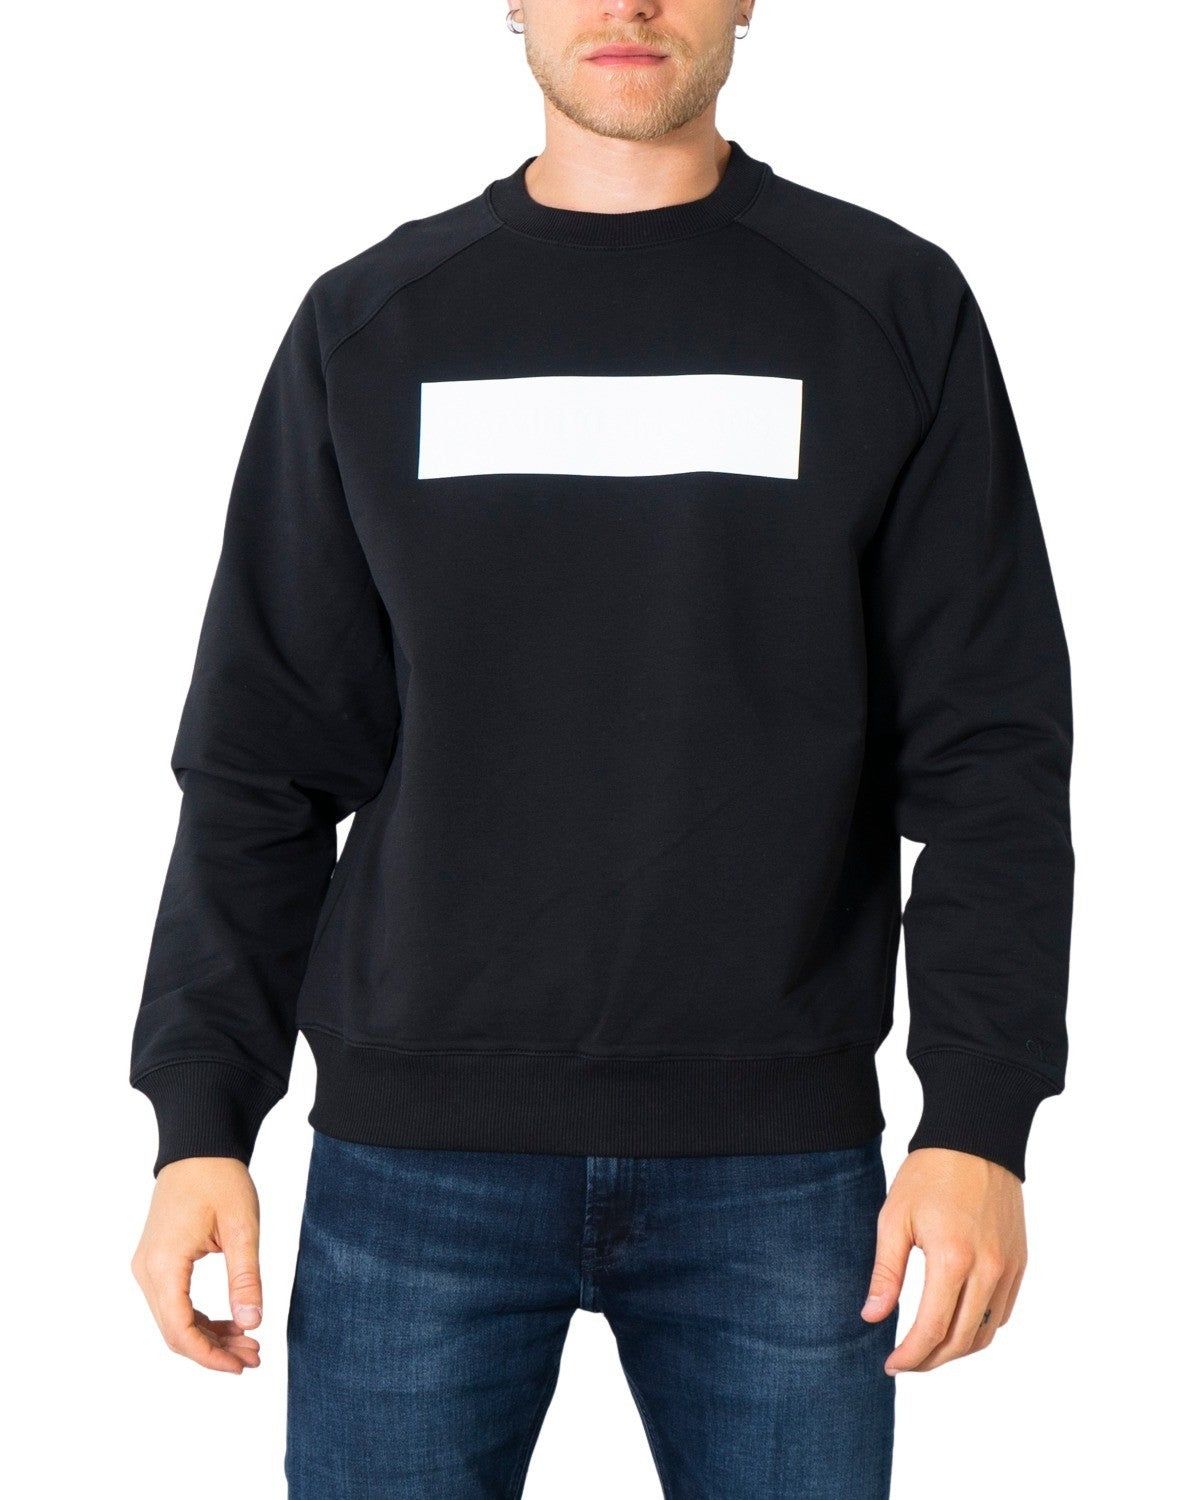 Brand: Calvin Klein Jeans Gender: Men Type: Sweatshirts Season: Fall/Winter  PRODUCT DETAIL • Color: black • Sleeves: long • Neckline: round neck  COMPOSITION AND MATERIAL • Composition: -95% cotton -5% elastane  •  Washing: machine wash at 30° -95% Cotton -5% Elastane